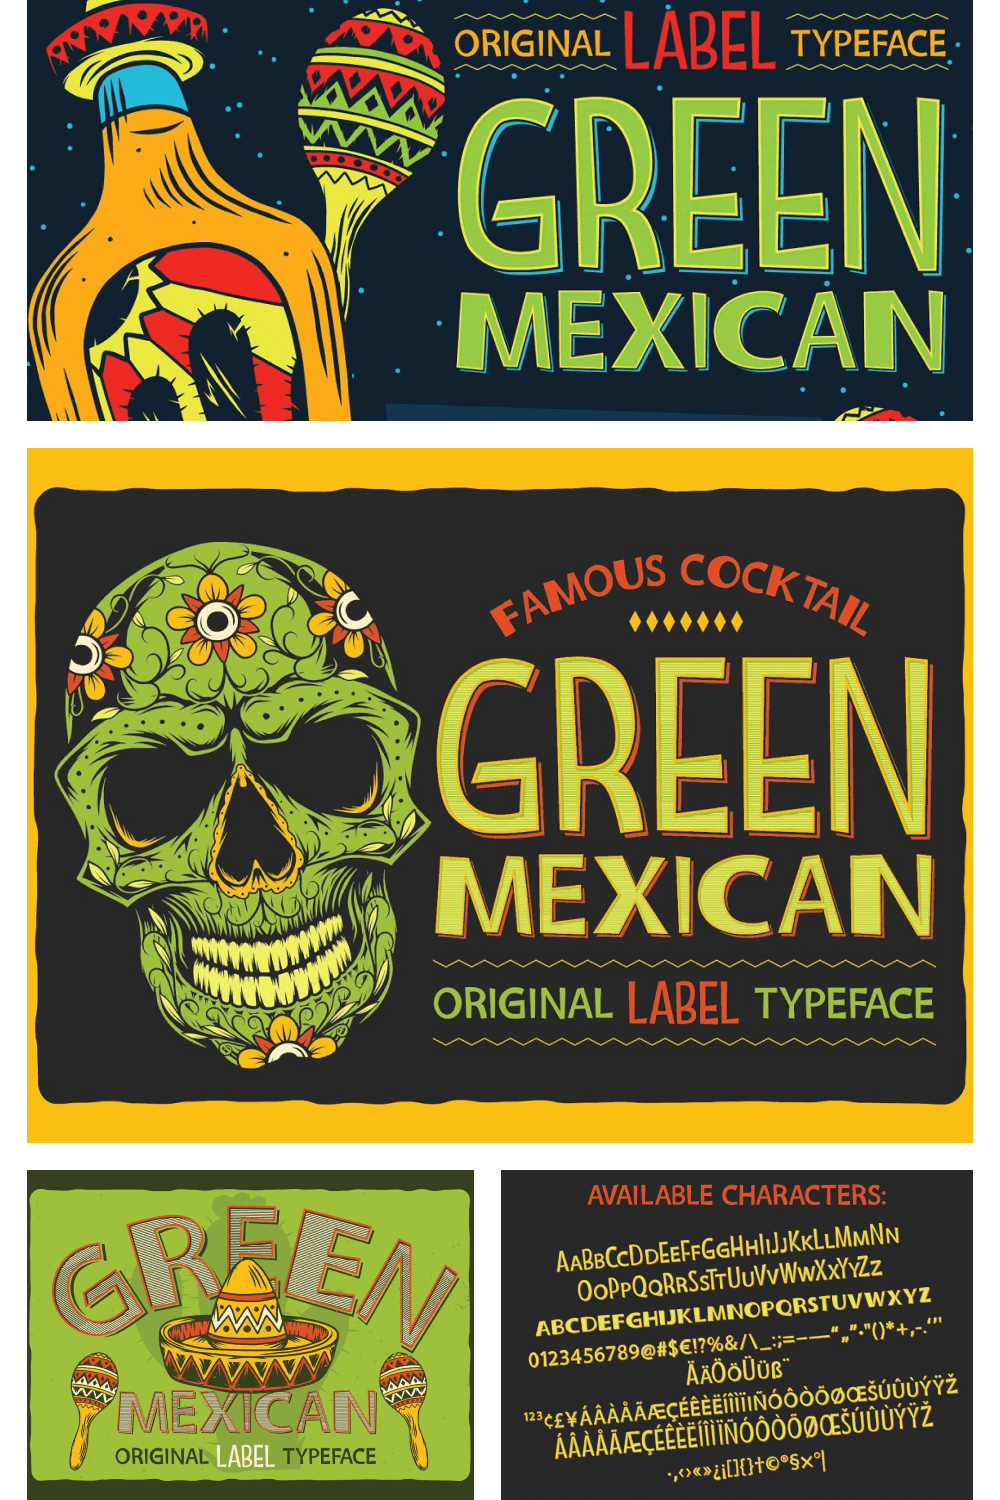 This is a vintage look label font. This font will good viewed on any retro design like poster, t-shirt, label, logo etc.